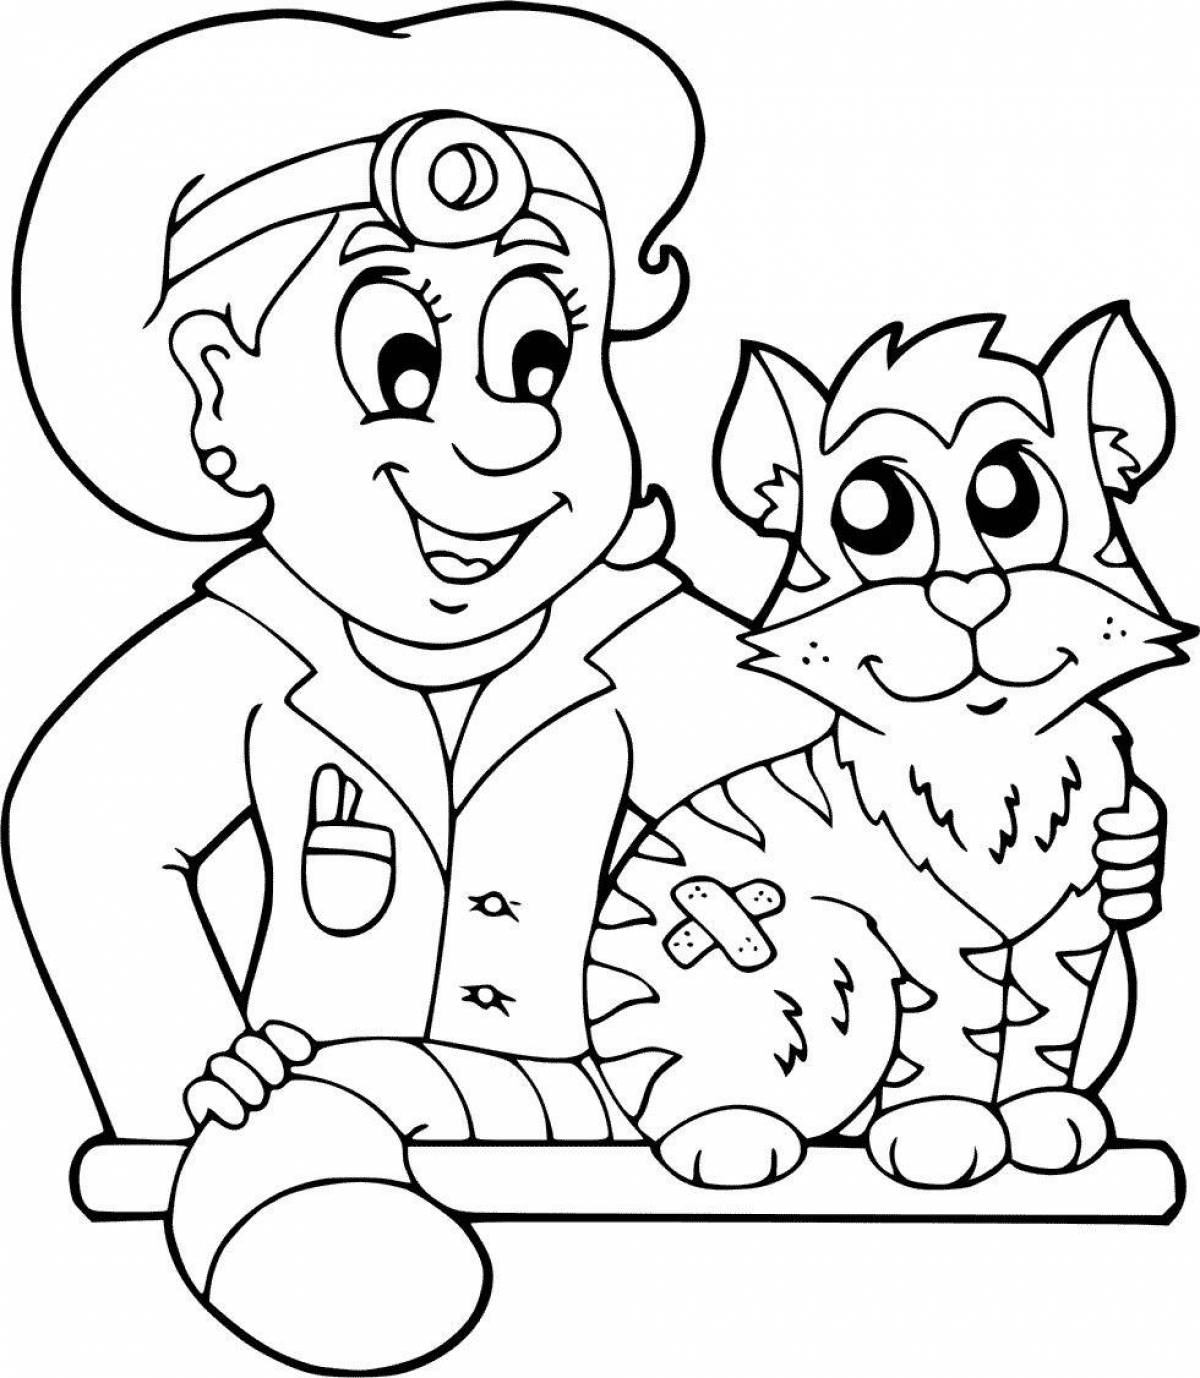 Cute vet coloring page